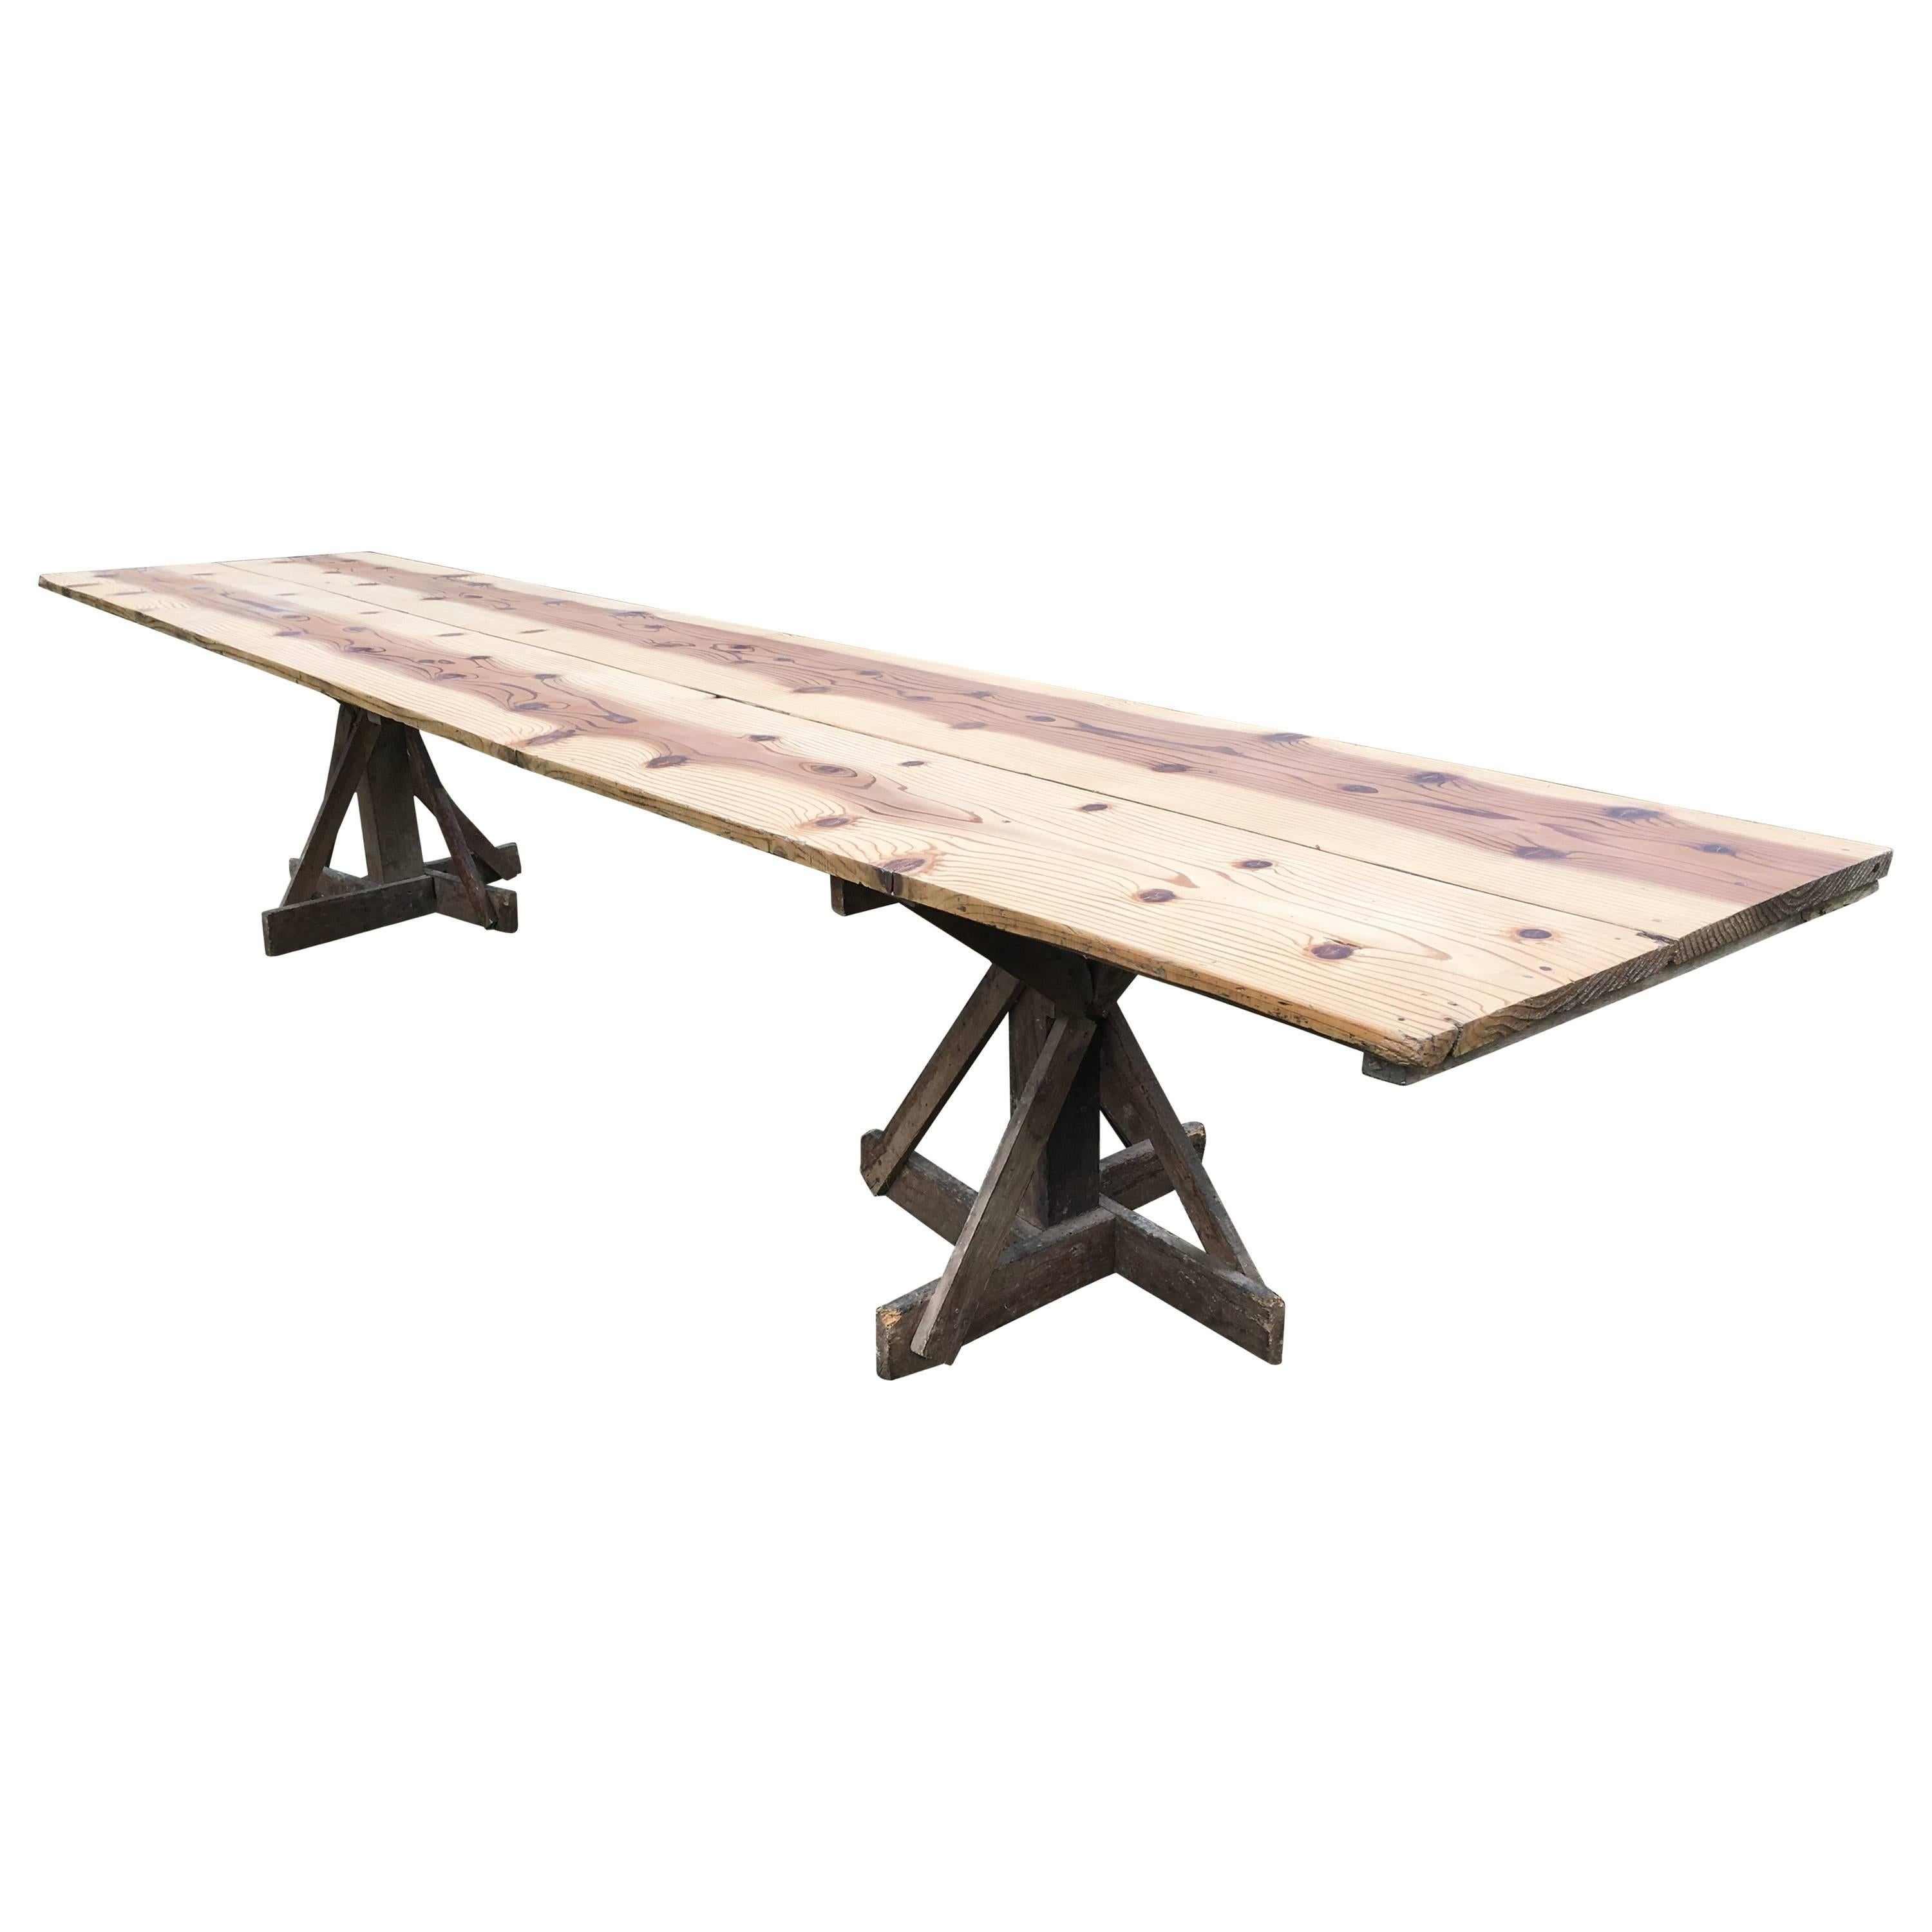 Rustic French Pine Dining Table